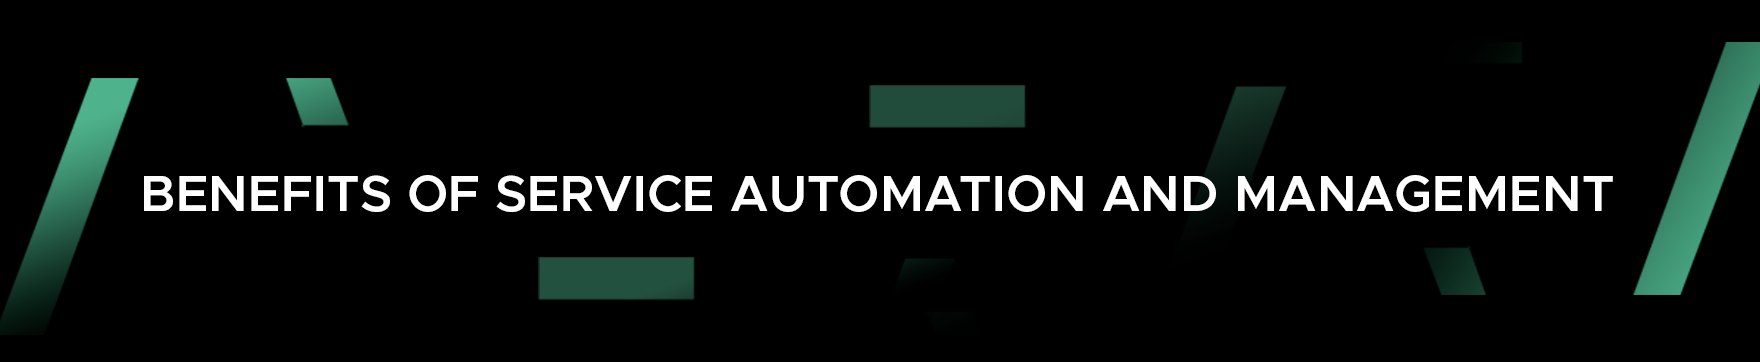 BENEFITS OF SERVICE AUTOMATION AND MANAGEMENT